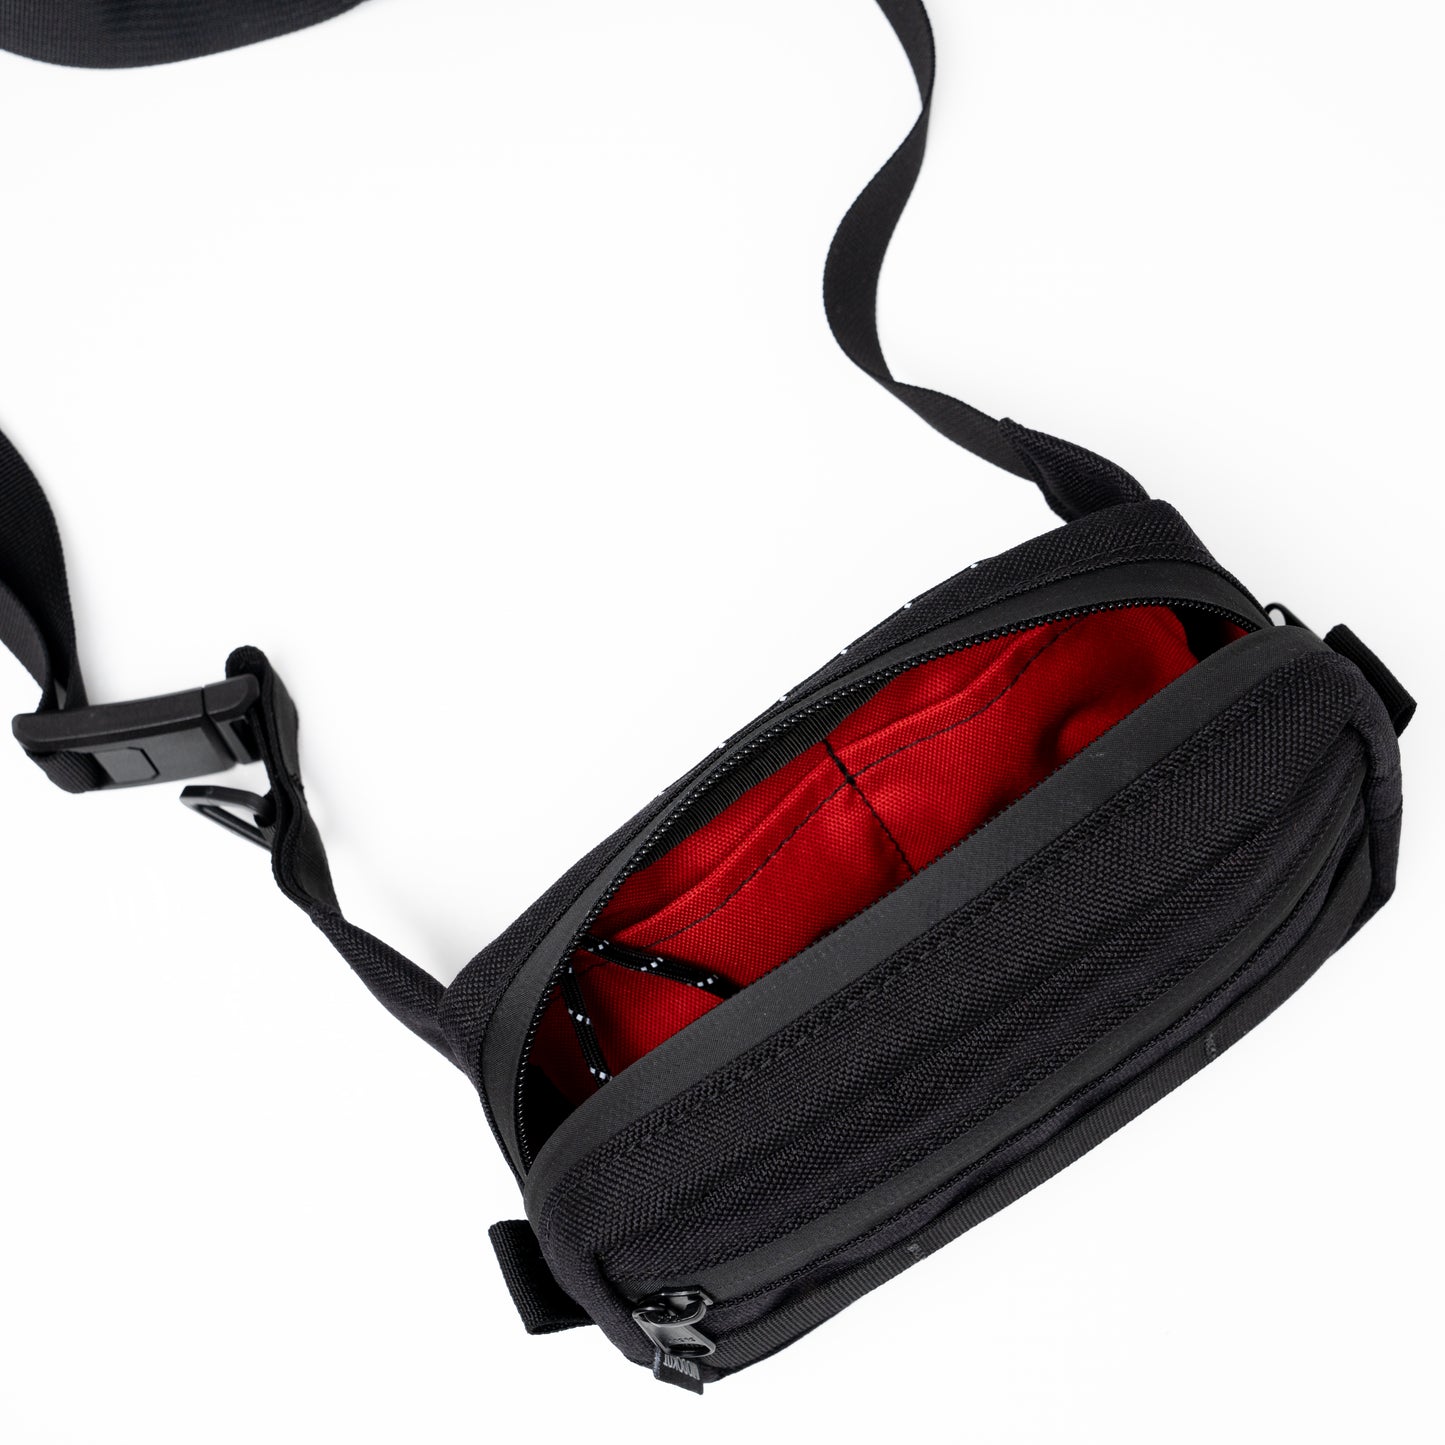 The Sling - Black / Red (molle)